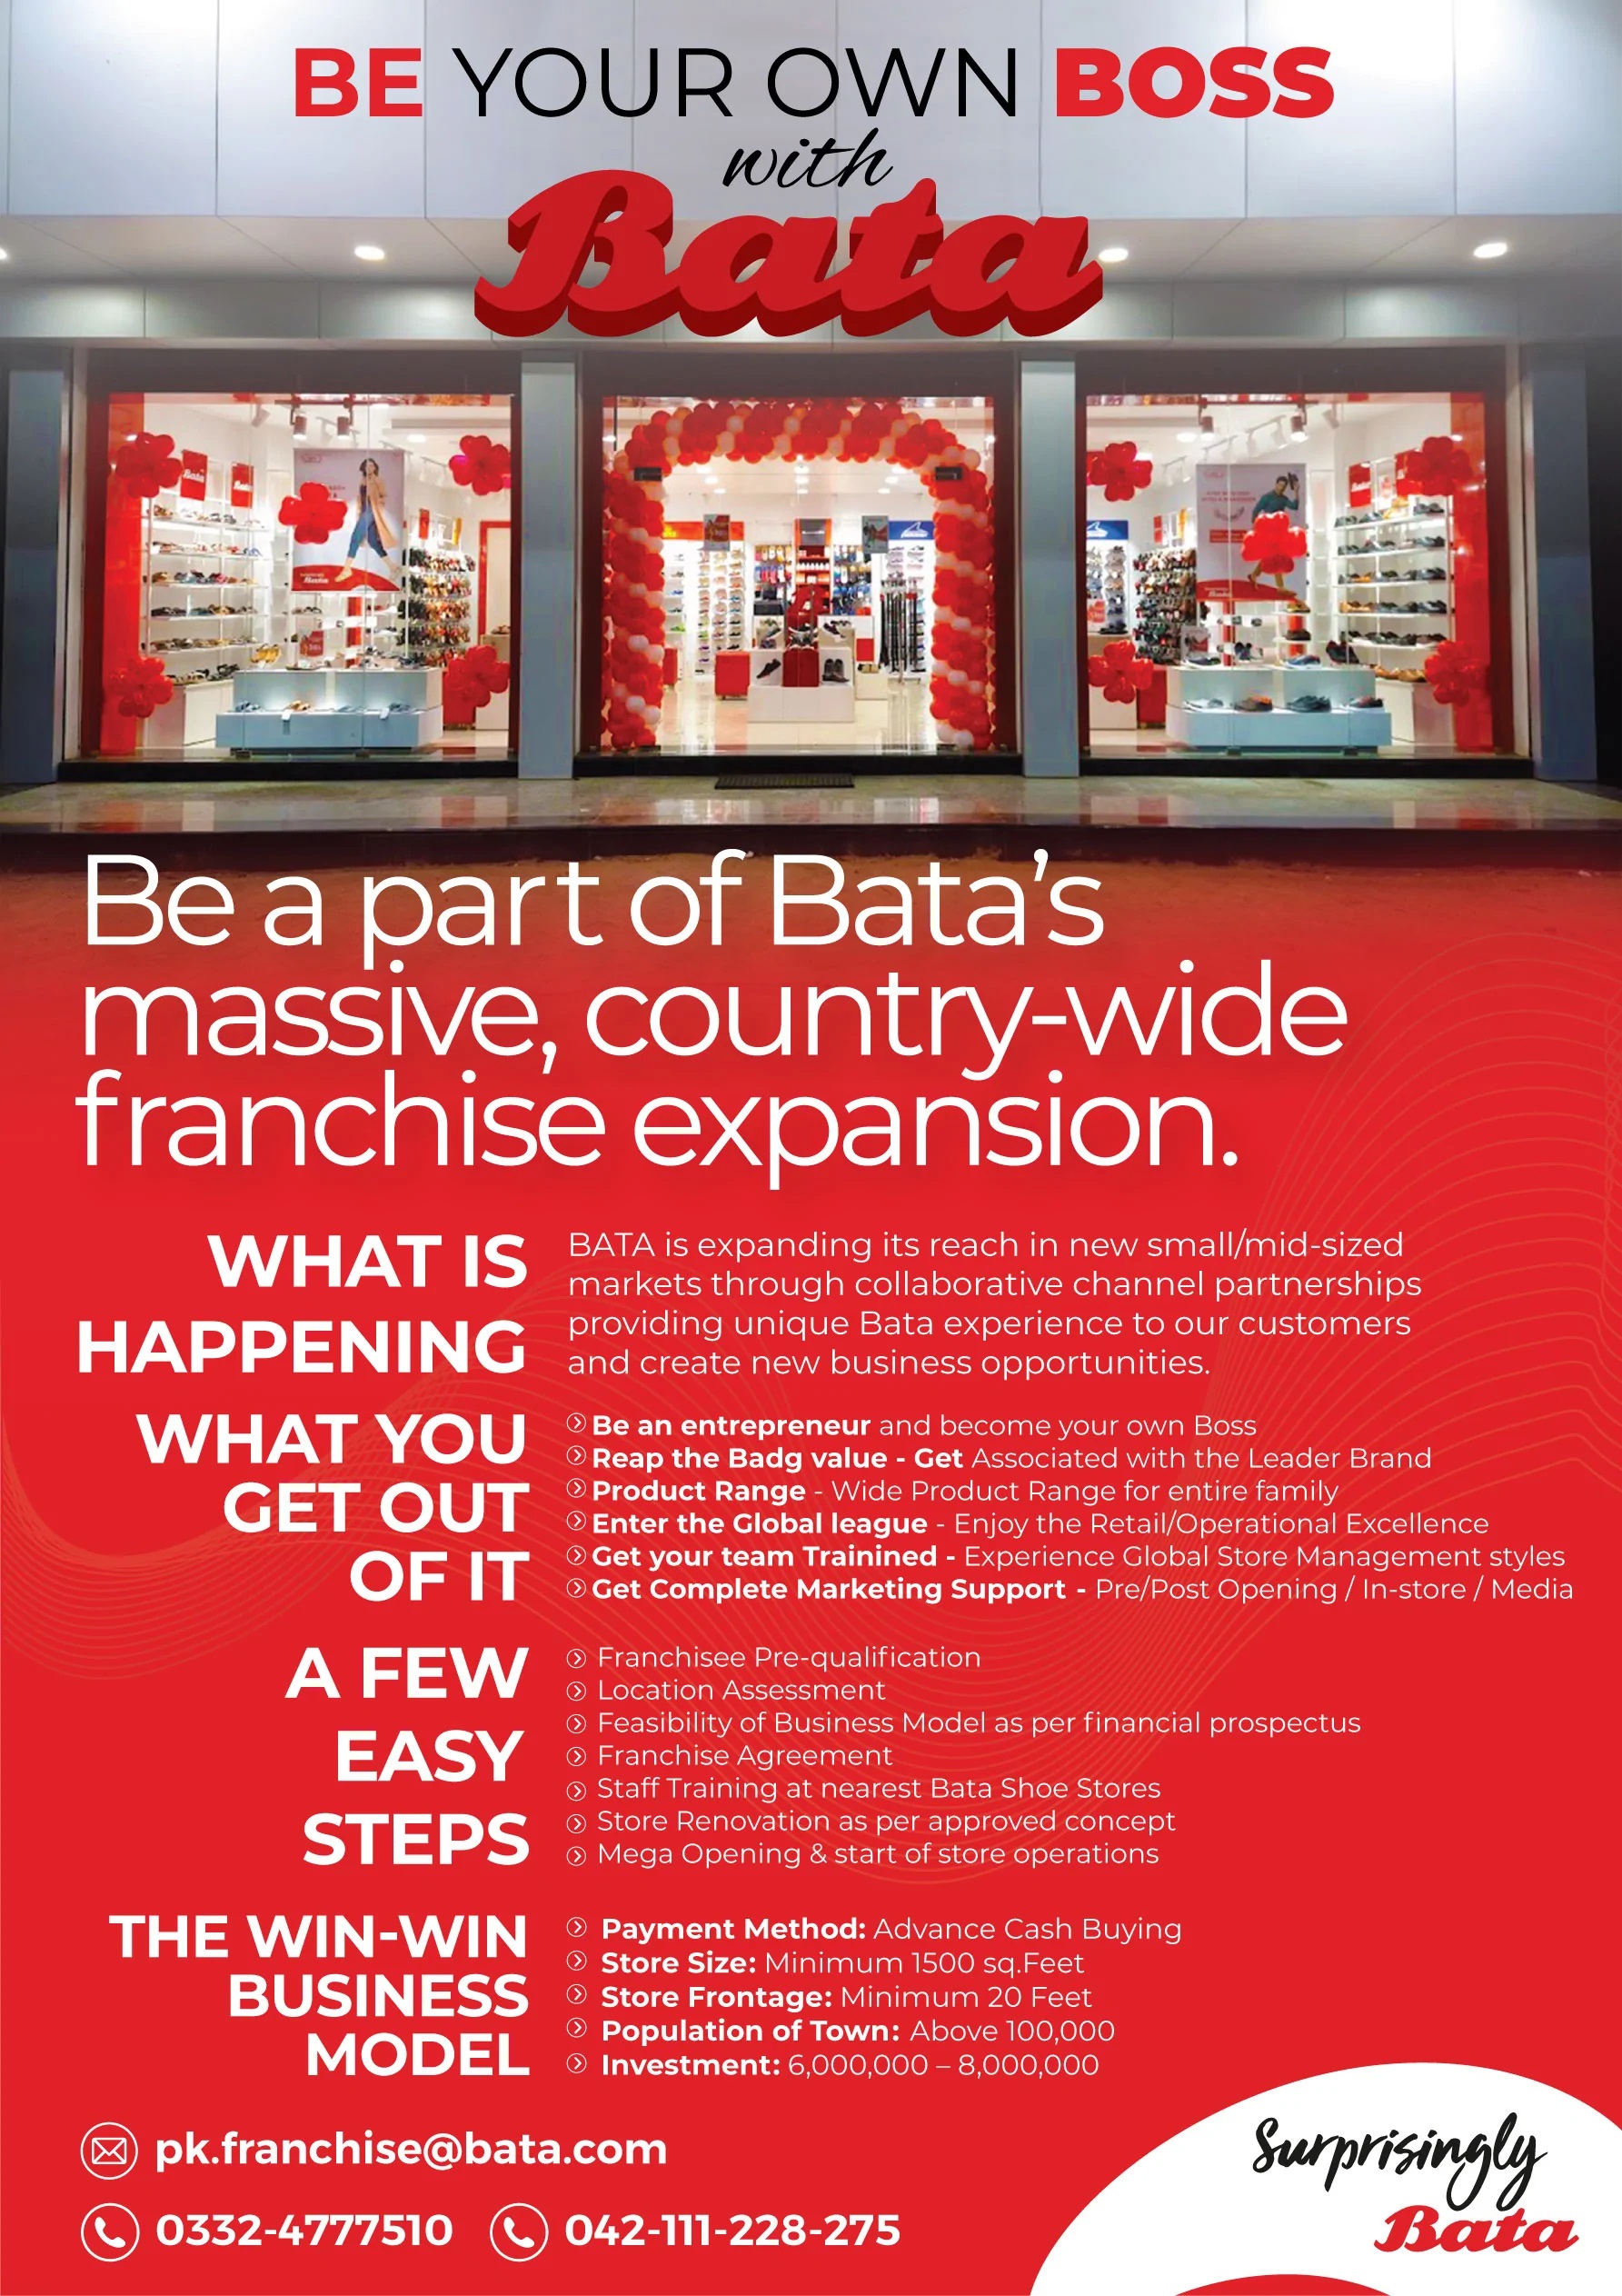 Start new own business with Bata Shoes company-Bata Franchise Program - Be Your Own Boss